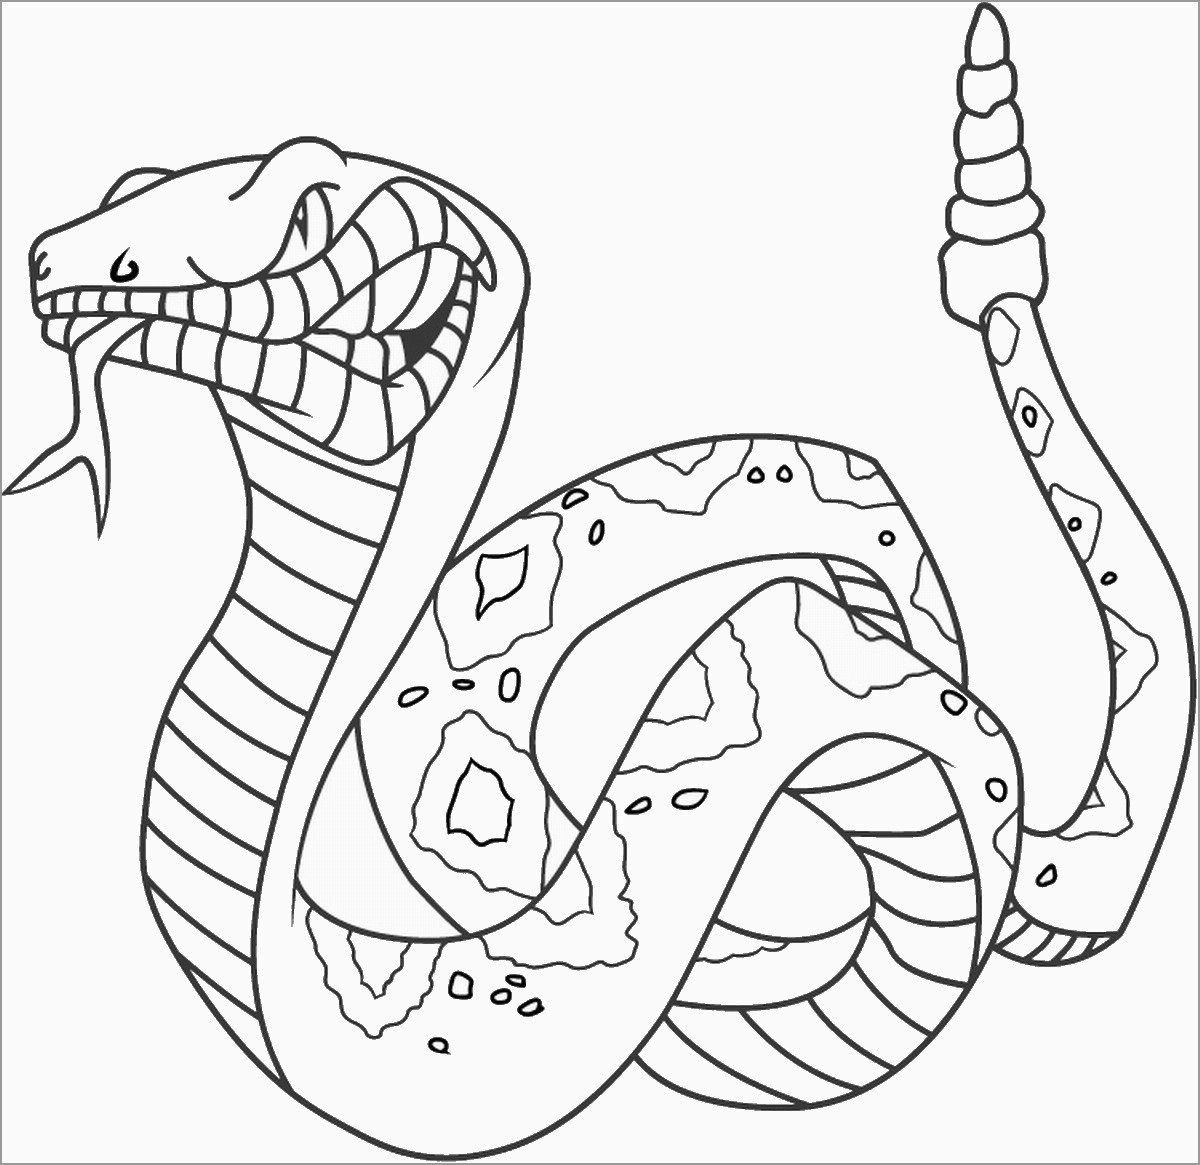 Snake Coloring Page for Adult